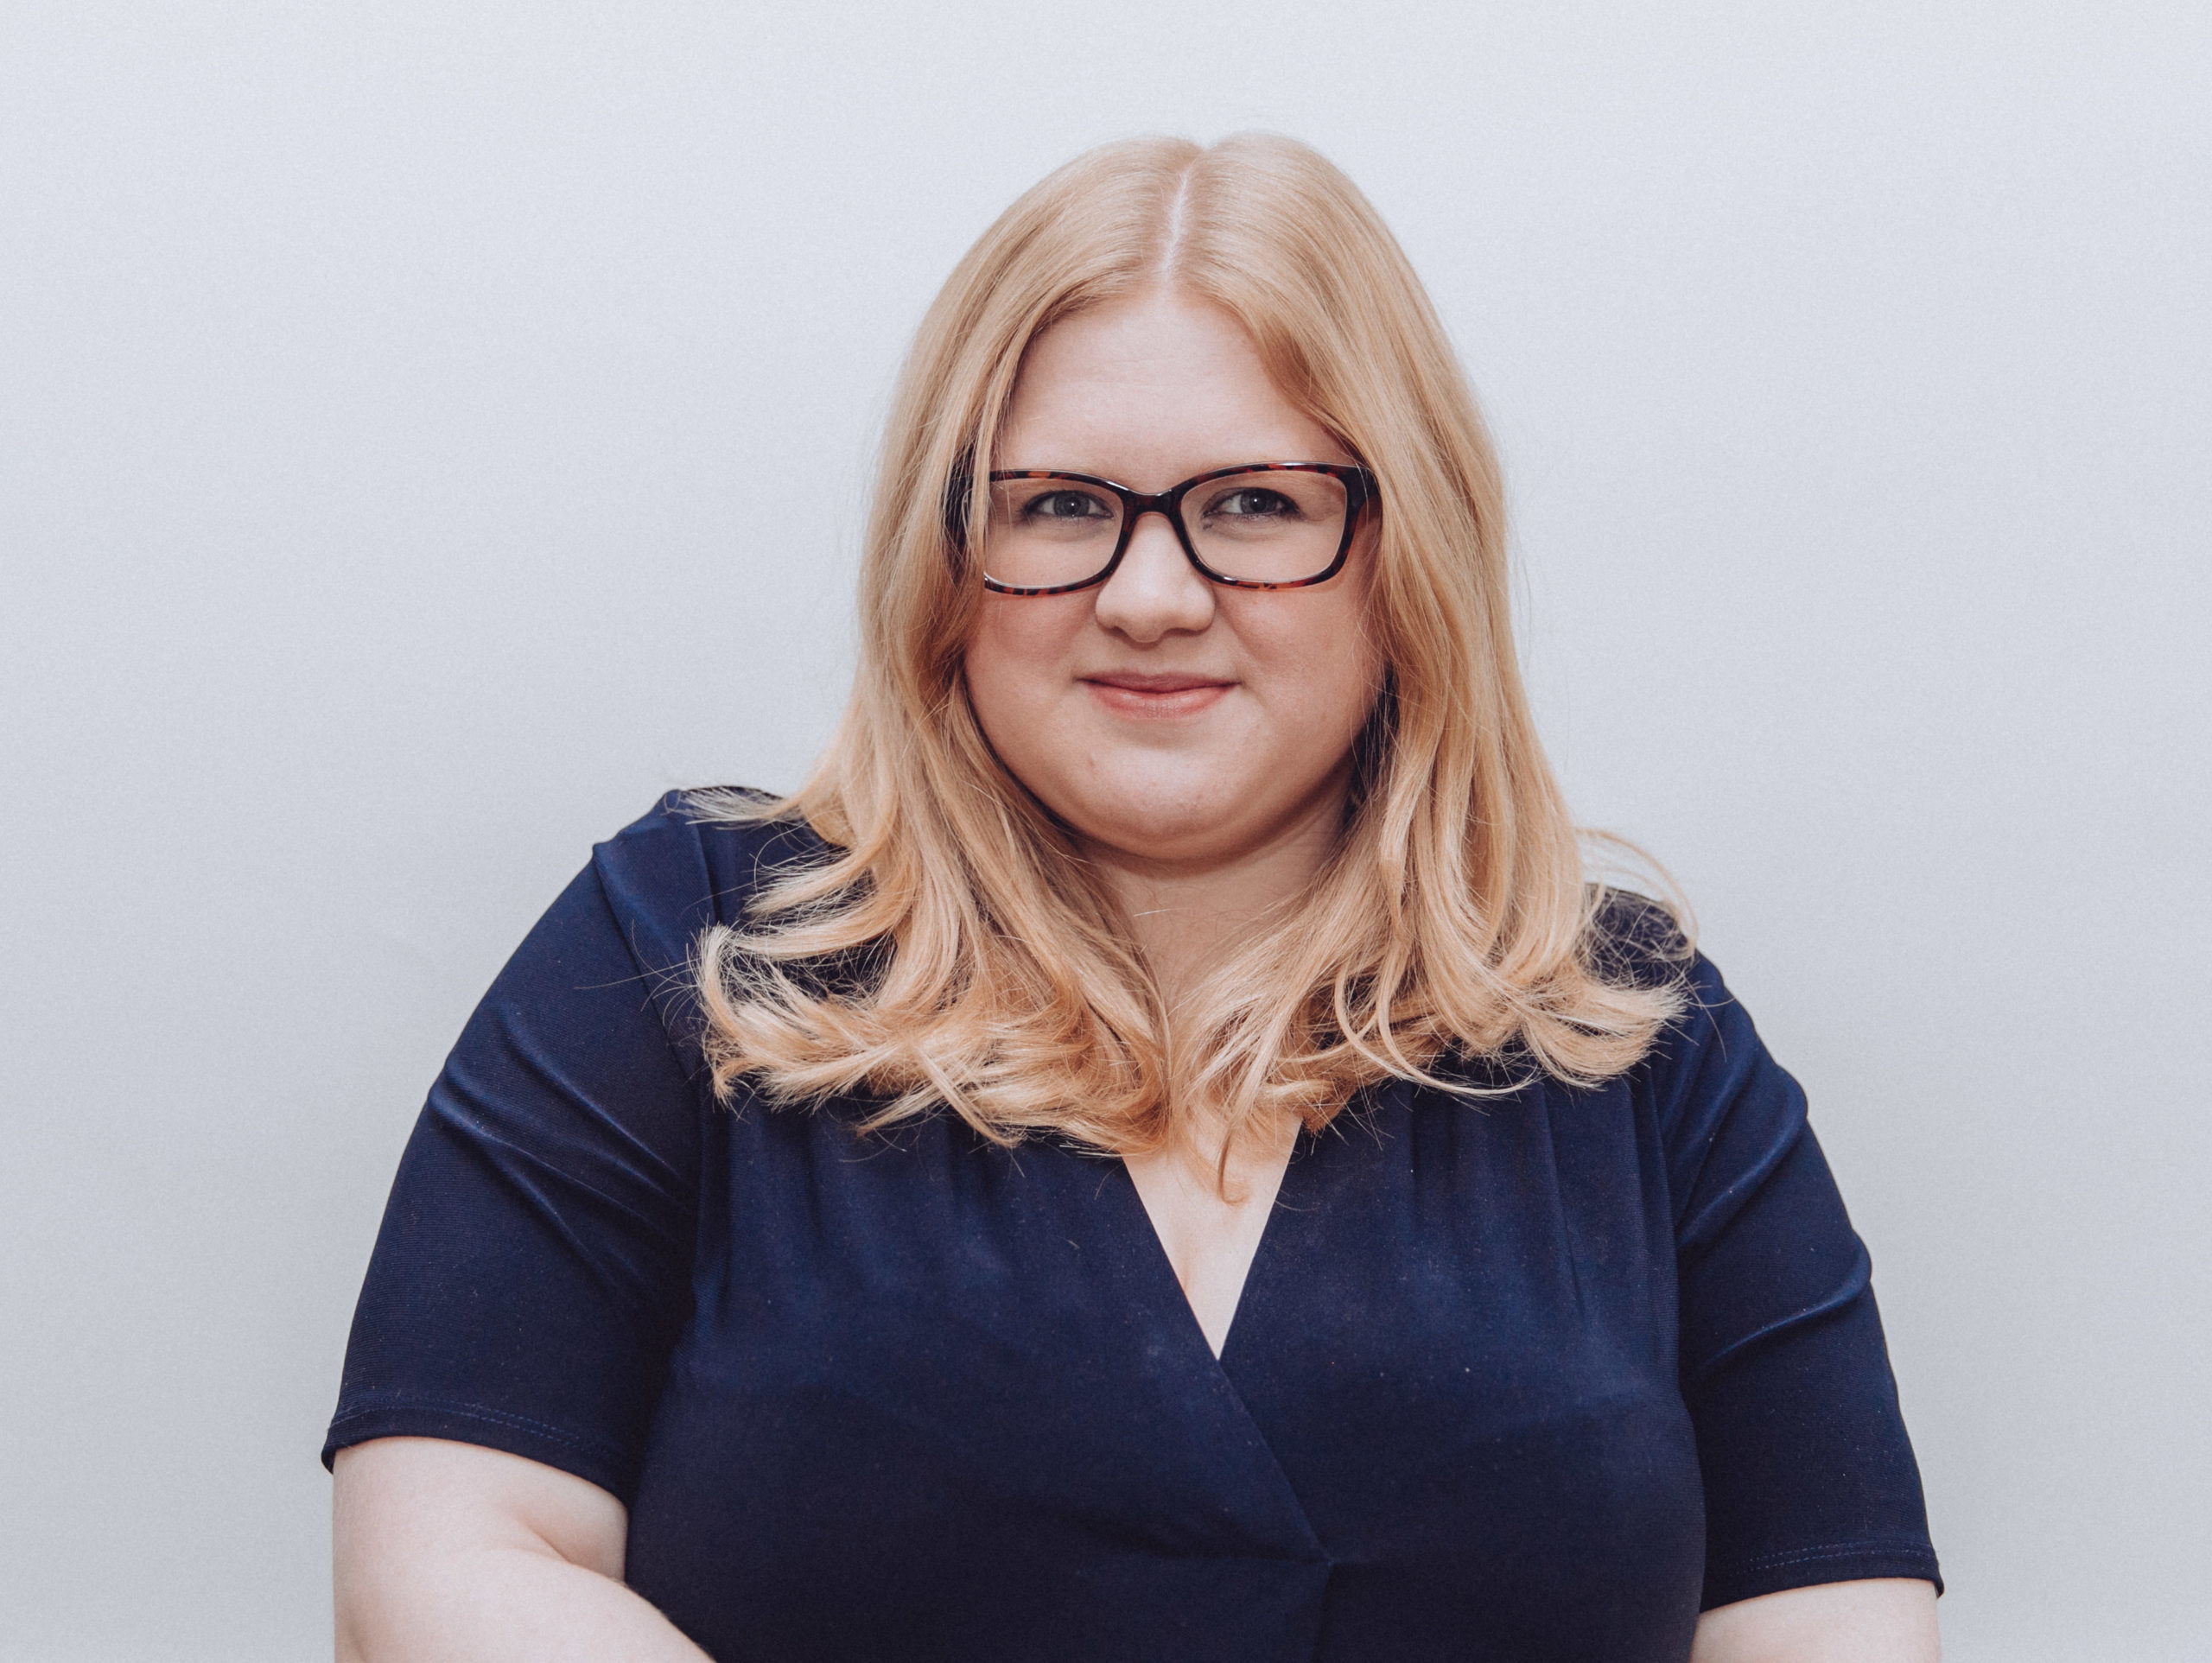 A headshot. Amy is a blonde white plus size woman wearing glasses. She is half smiling at the camera and wears a navy dress